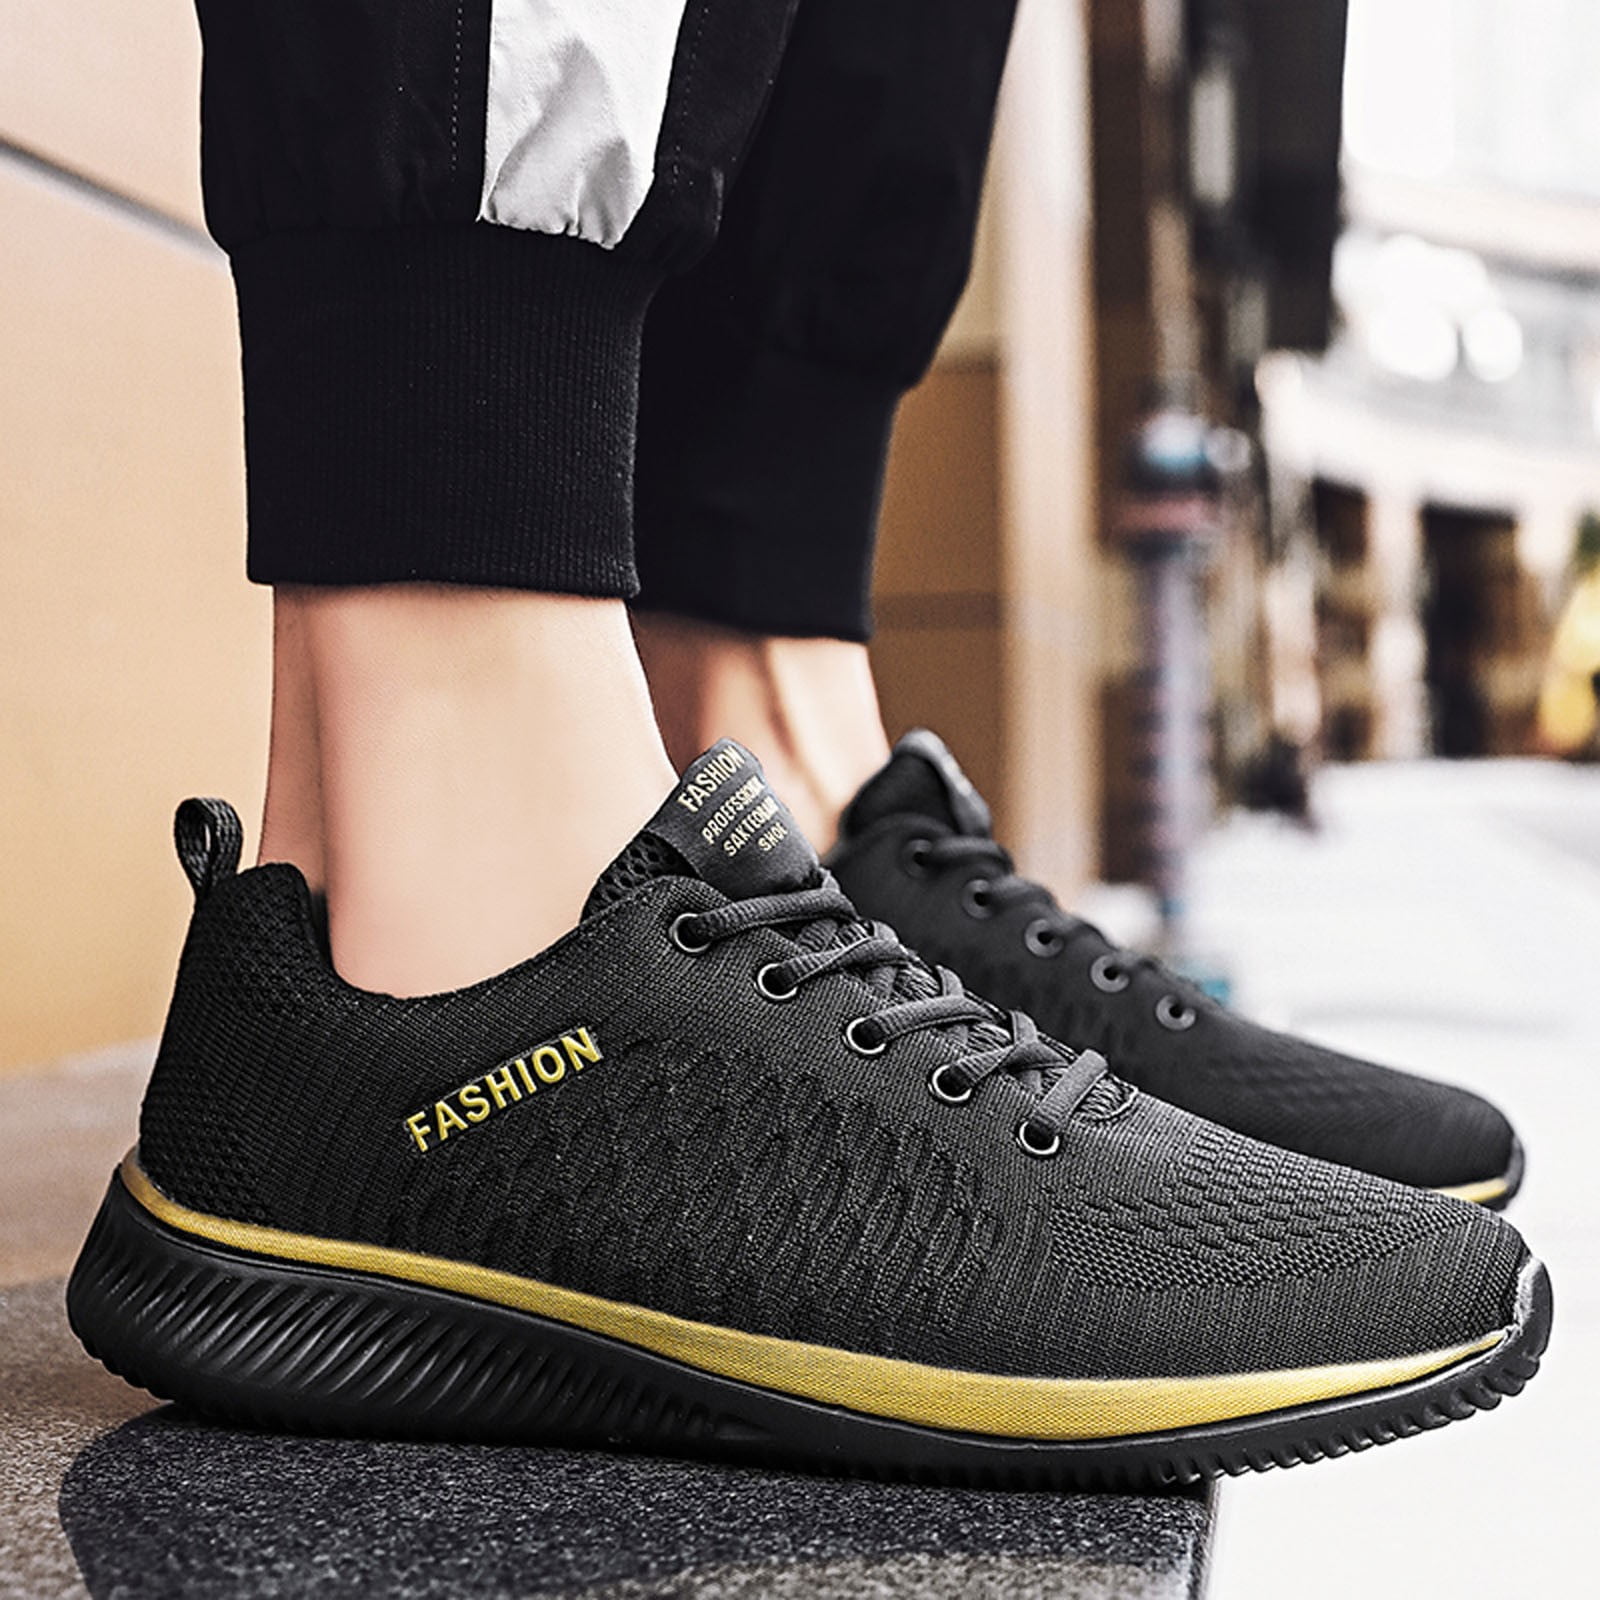 Shoes Black Size US 11.5/ UK 9.5/ EU 42 Walking Shoes Sneakers Lightweight Casual Gym Breathable Womens Mesh Sports Shoe